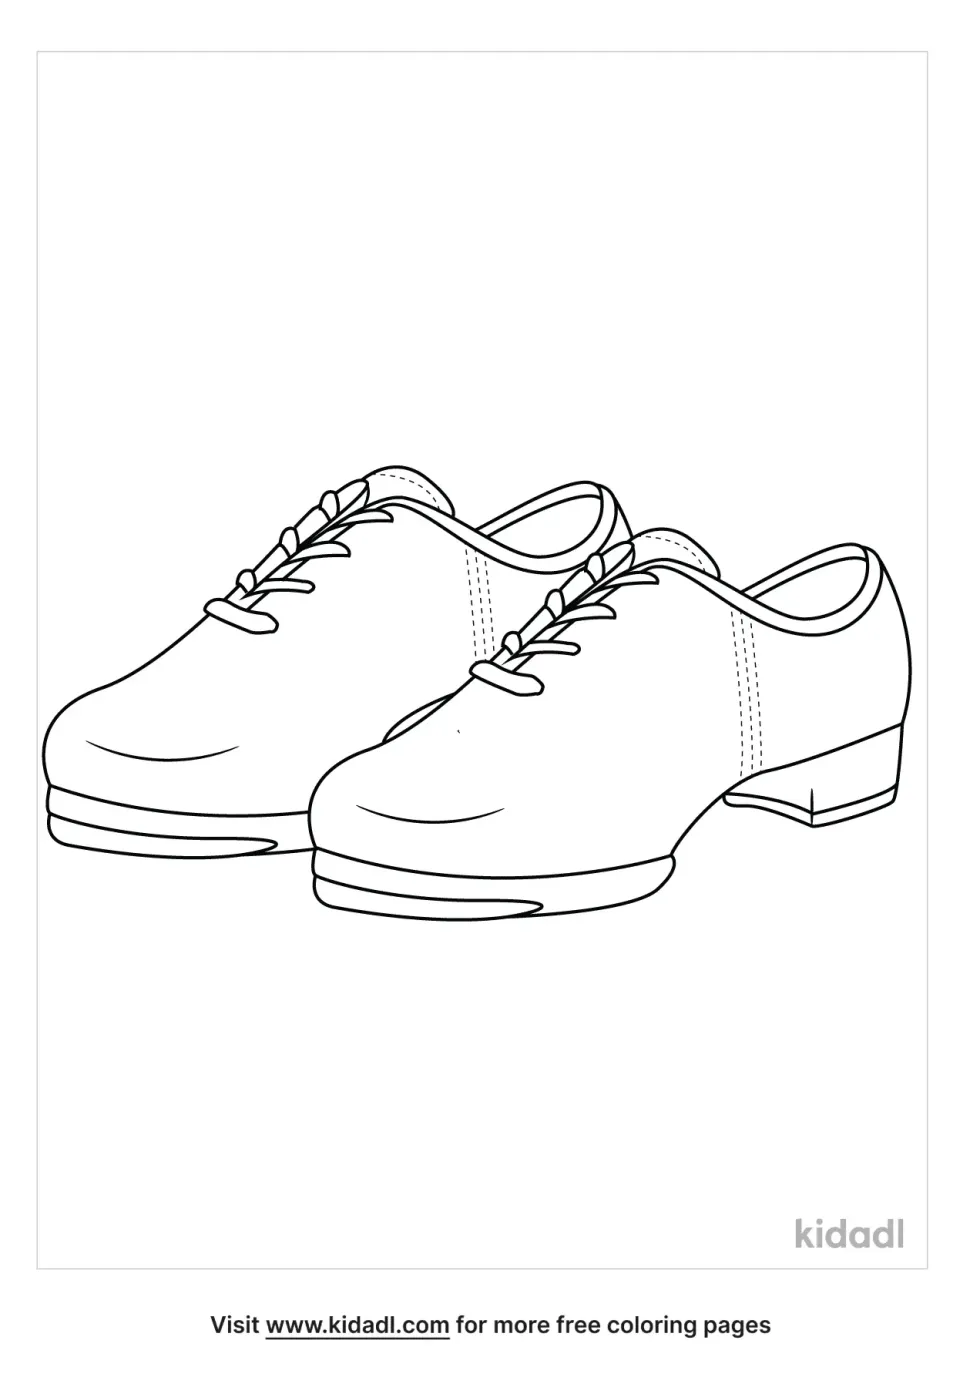 Clogging Shoes Coloring Page